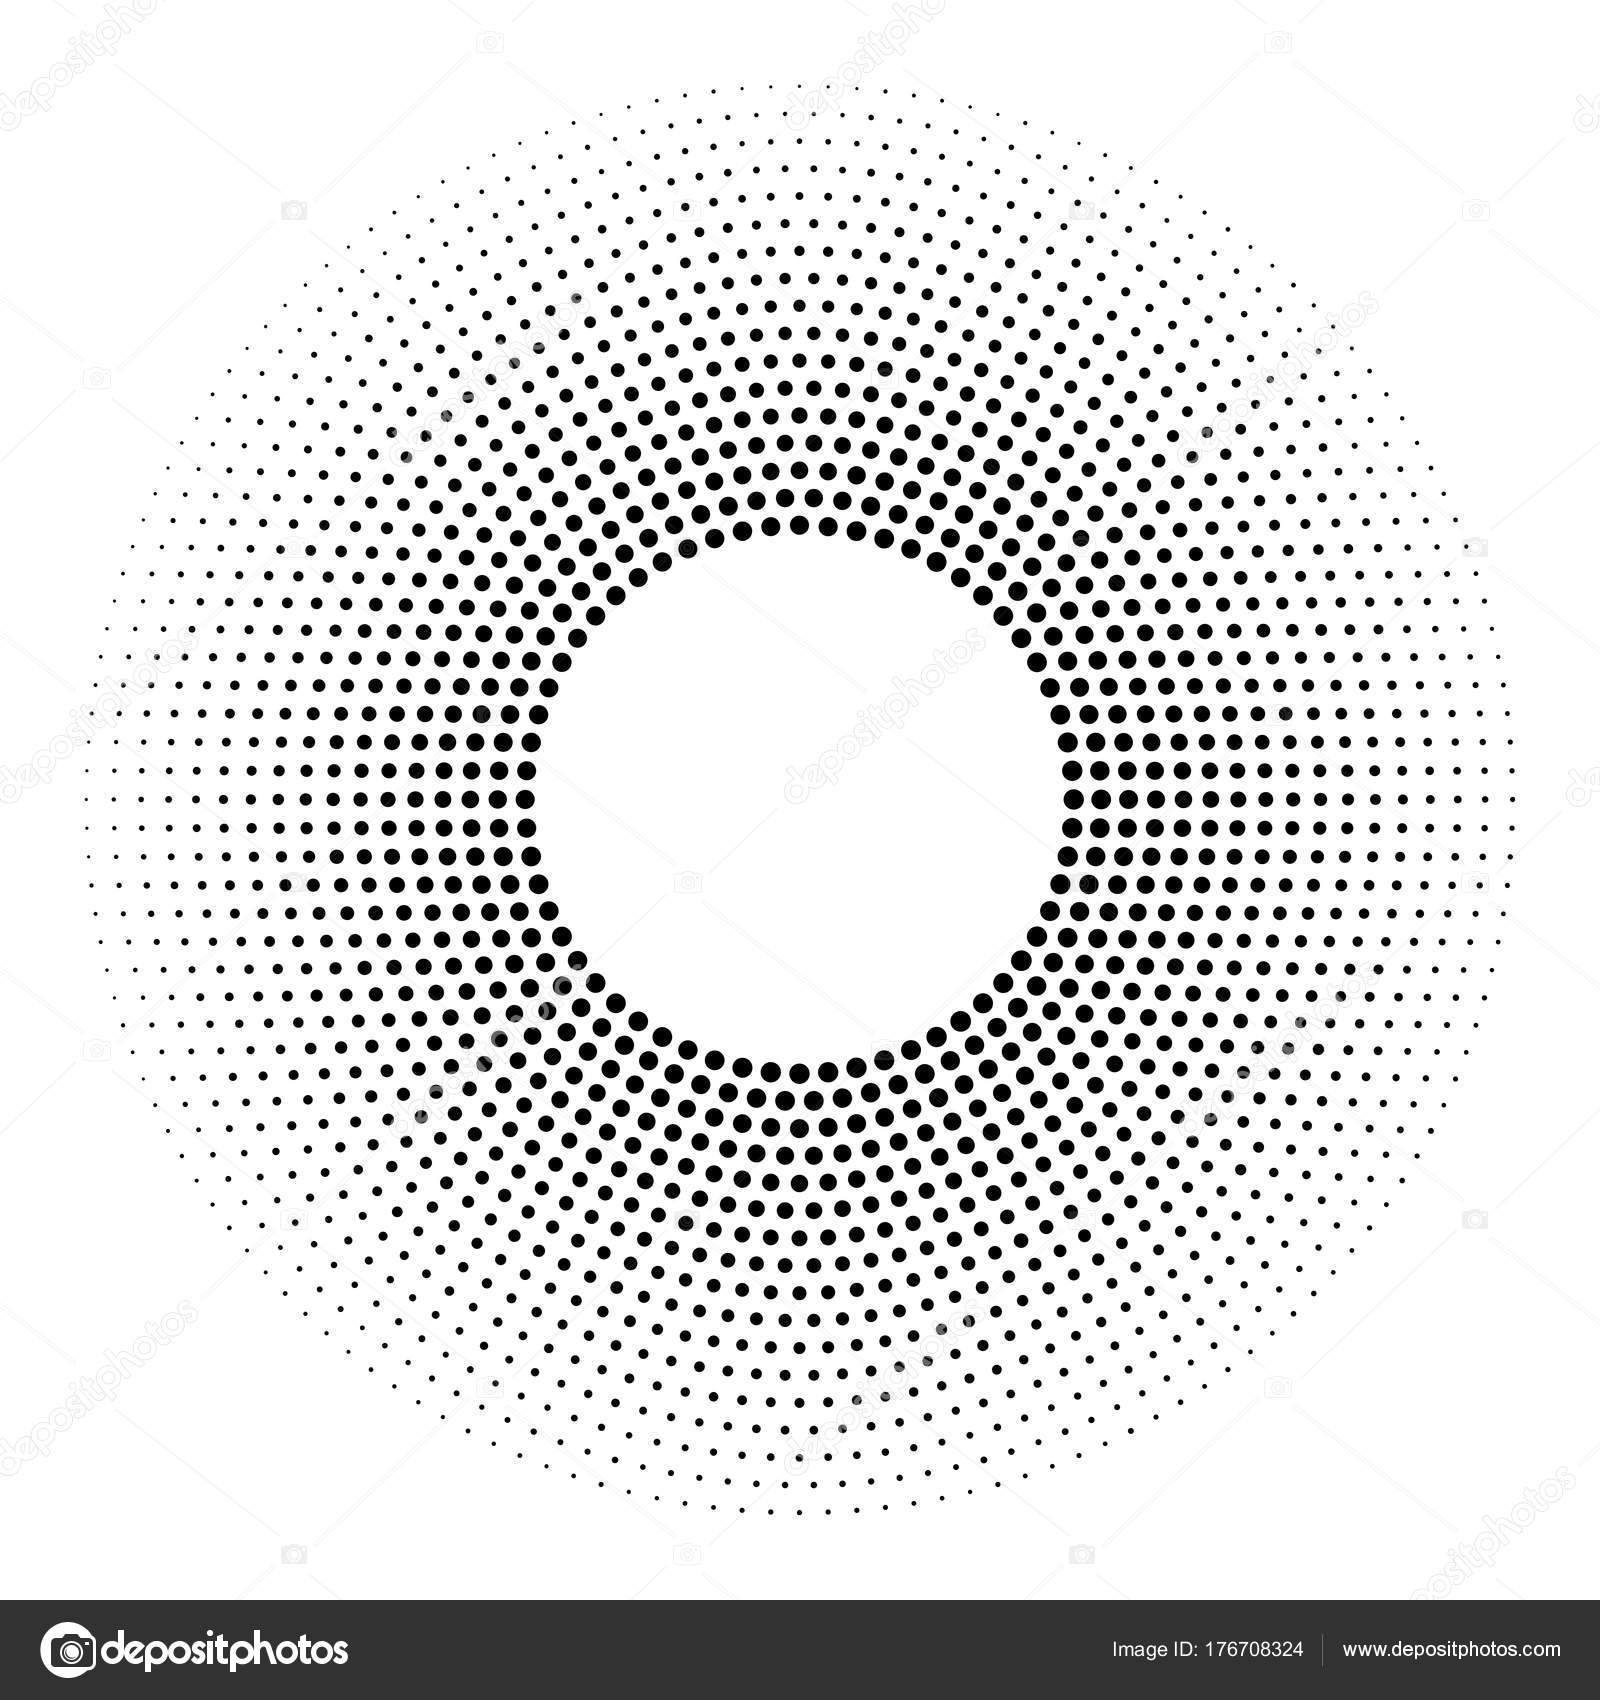 Halftone dotted background circularly distributed. Halftone effect ...